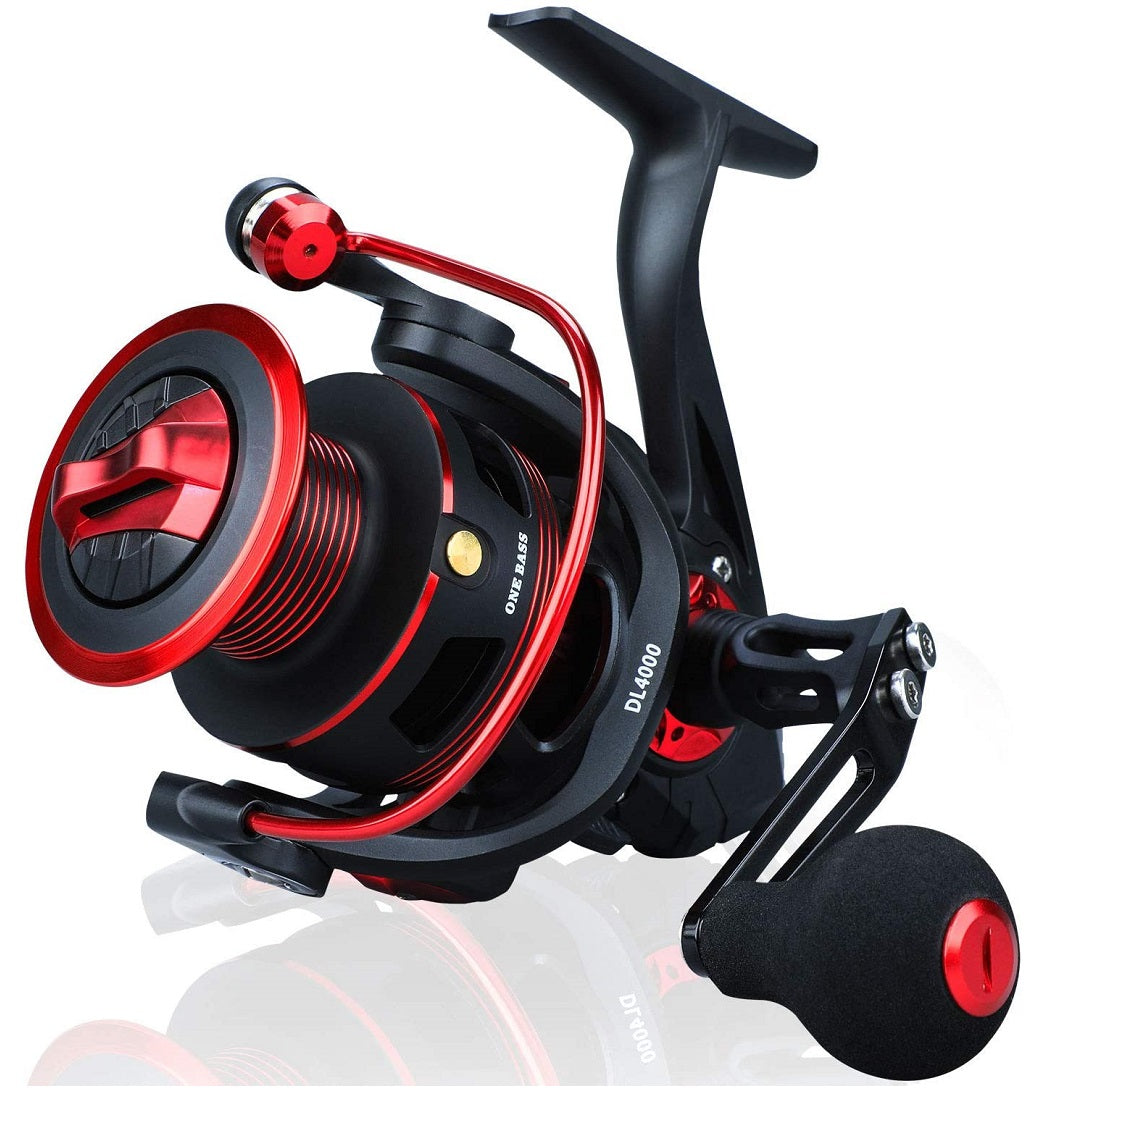  Fishing Reels Spinning Reel Open Face - Powerful 5.2:1 Smooth  Spinning Reels Freshwater Good Casting Distance for Inshore Freshwater  Bass, Sport Fish - Remi 3000 Spinning Reel -– U.S. Veteran Owned : Sports &  Outdoors